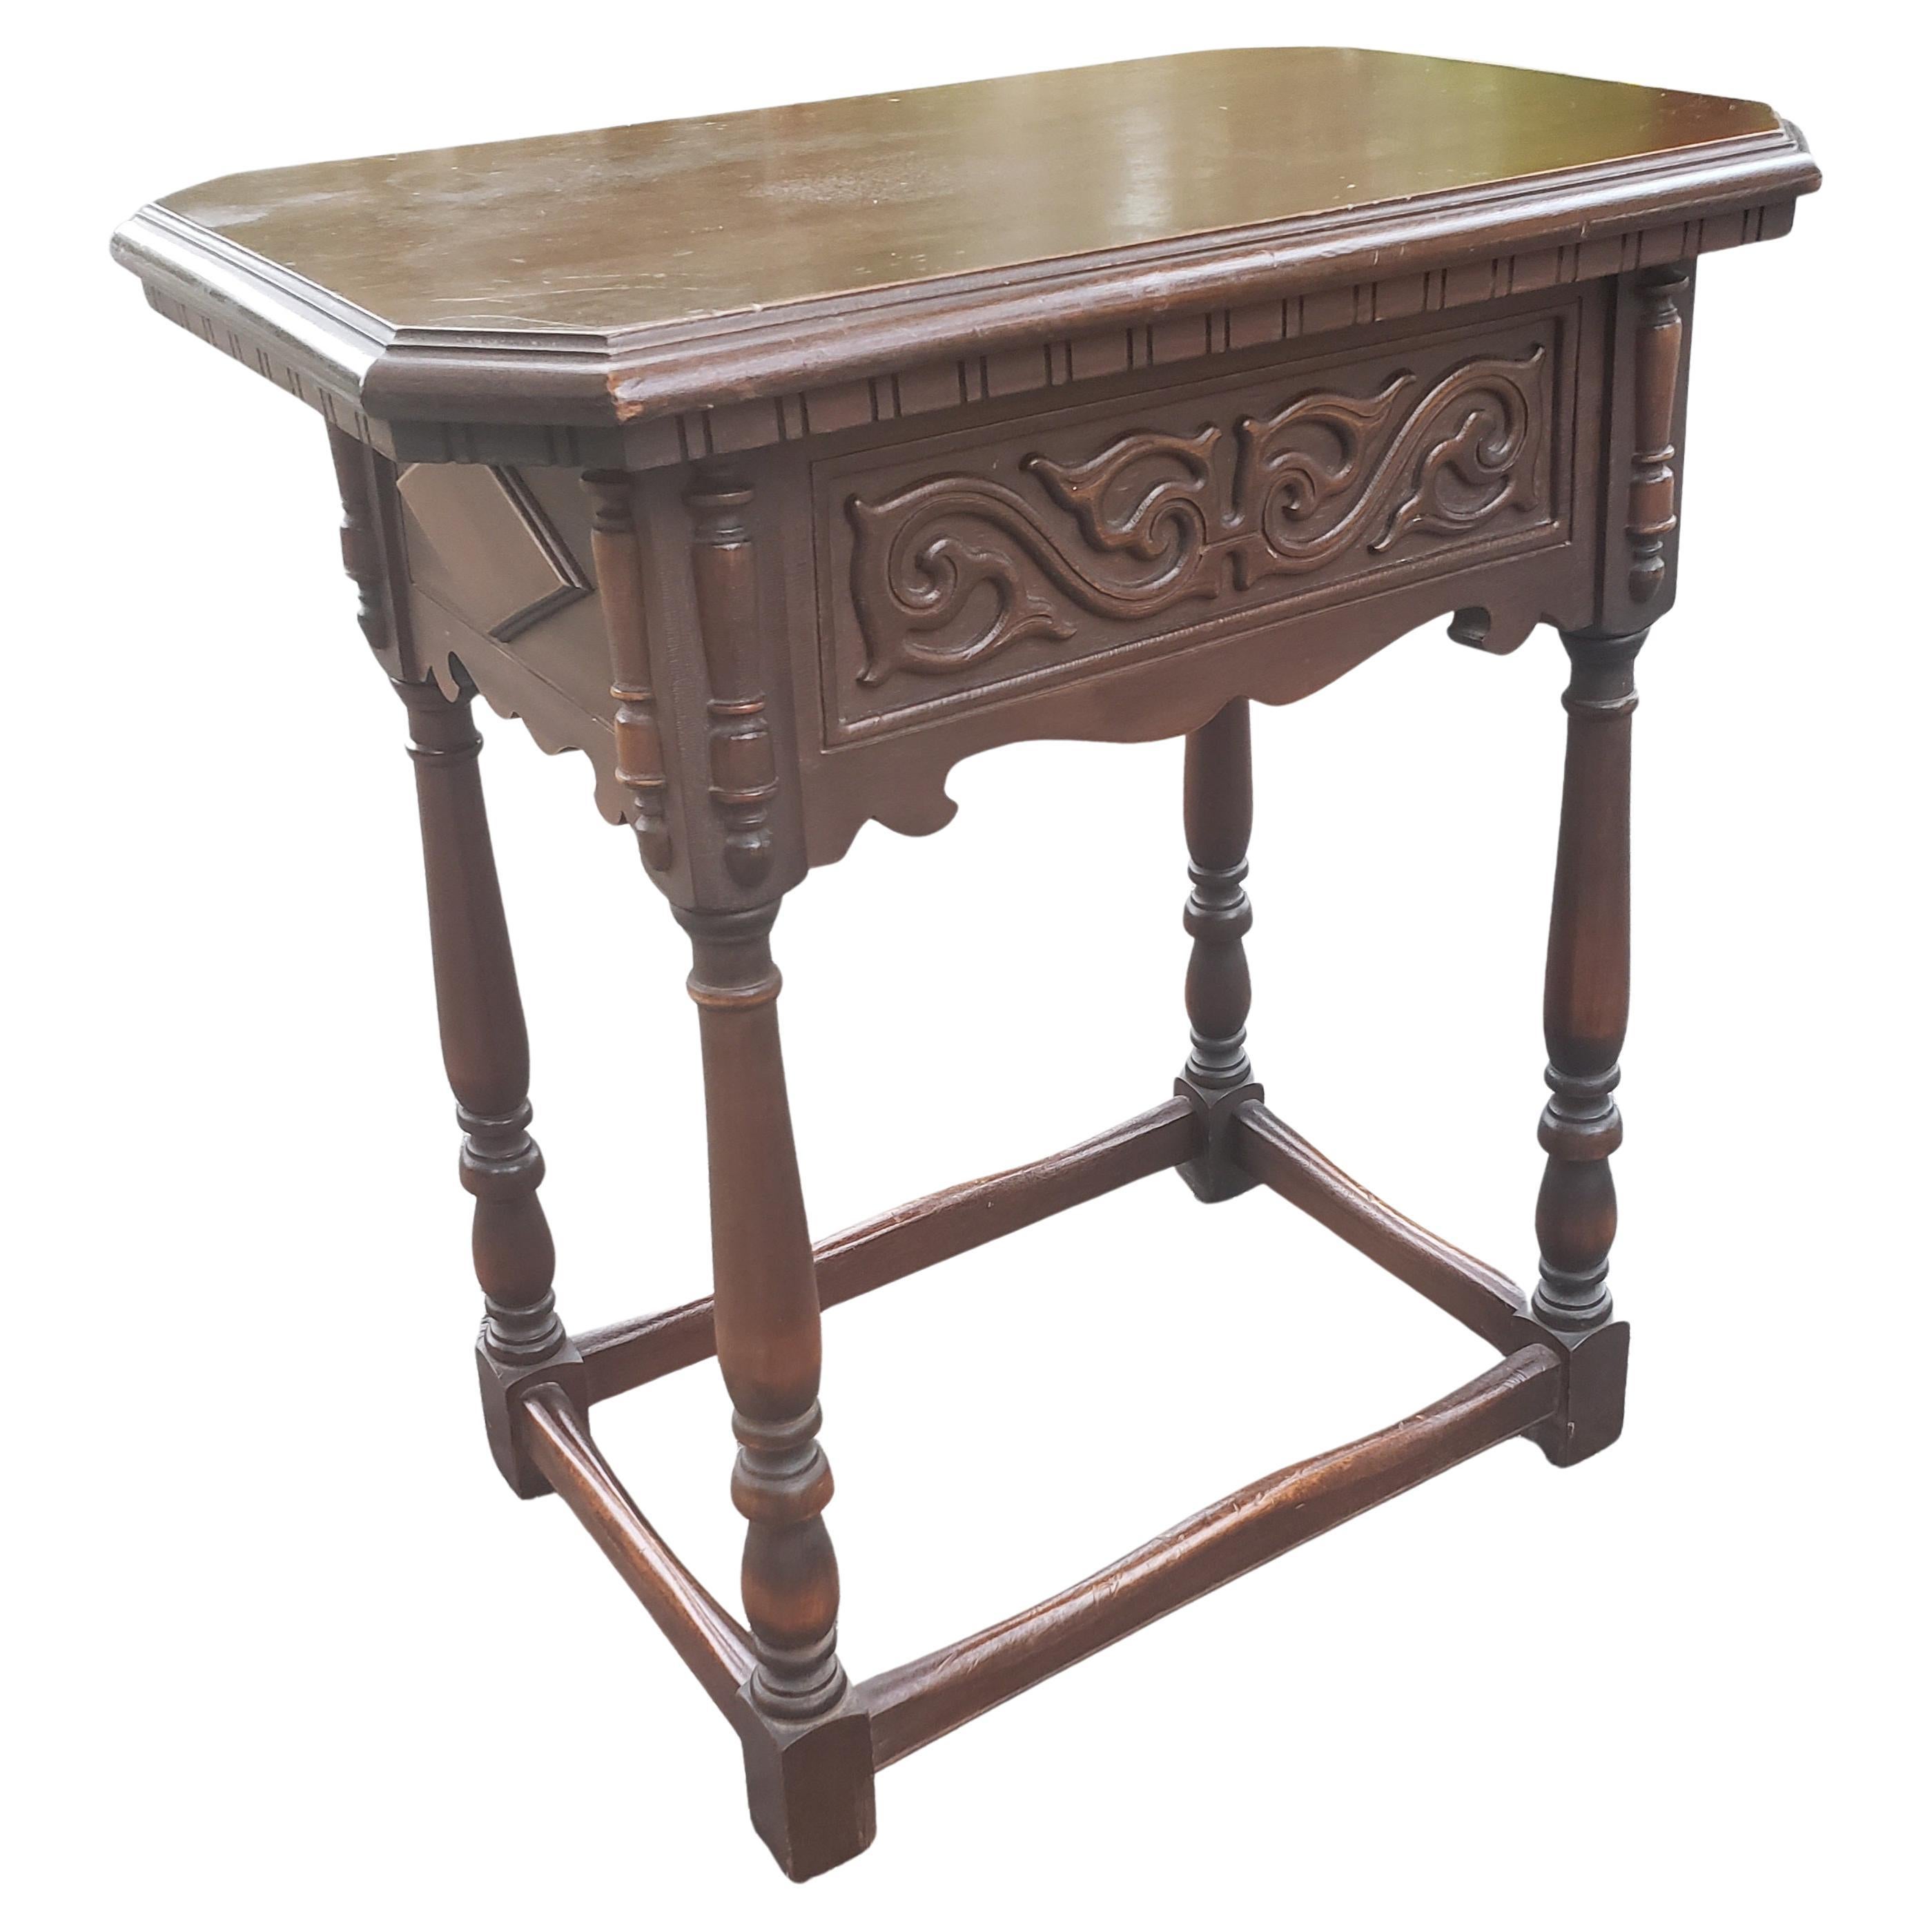 Antique Edwardian Carved Walnut Side Table, Circa 1920s